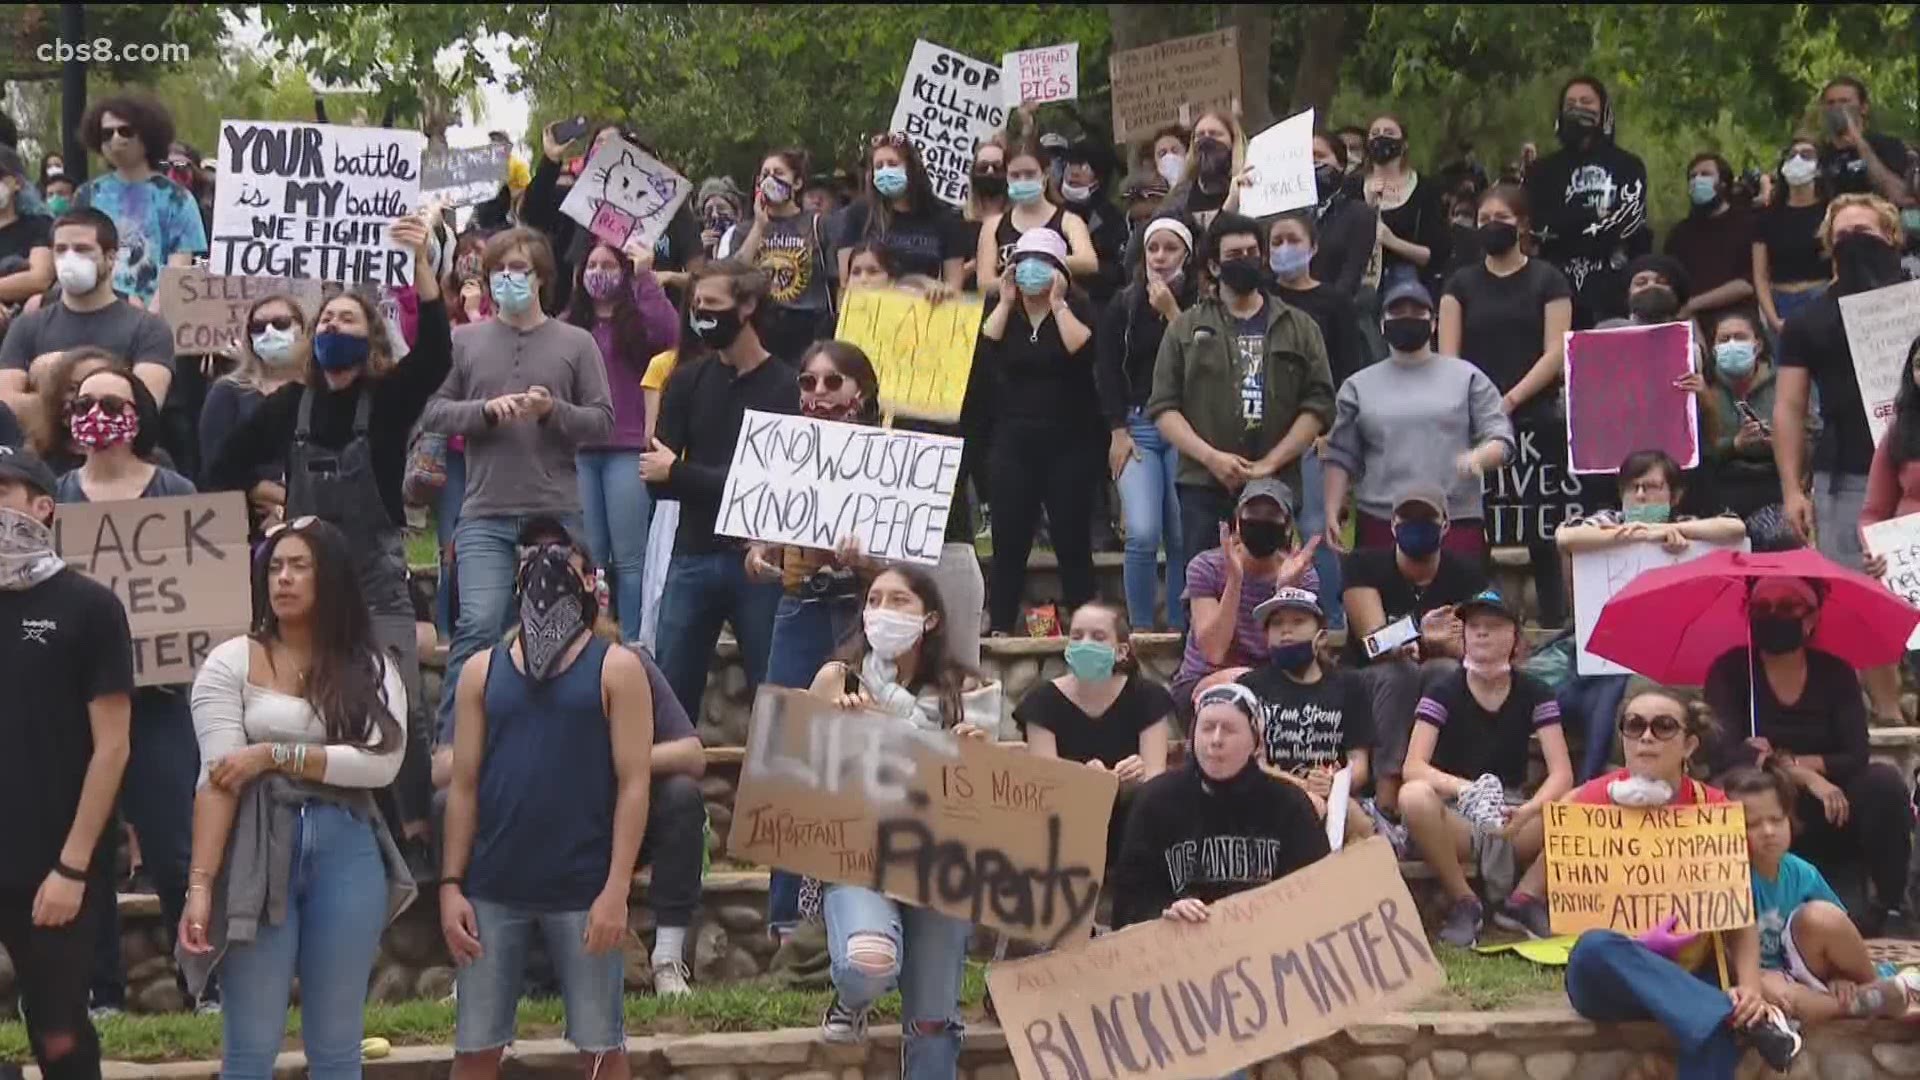 People from Vista to Oceanside hit the streets to fight for racial equality.